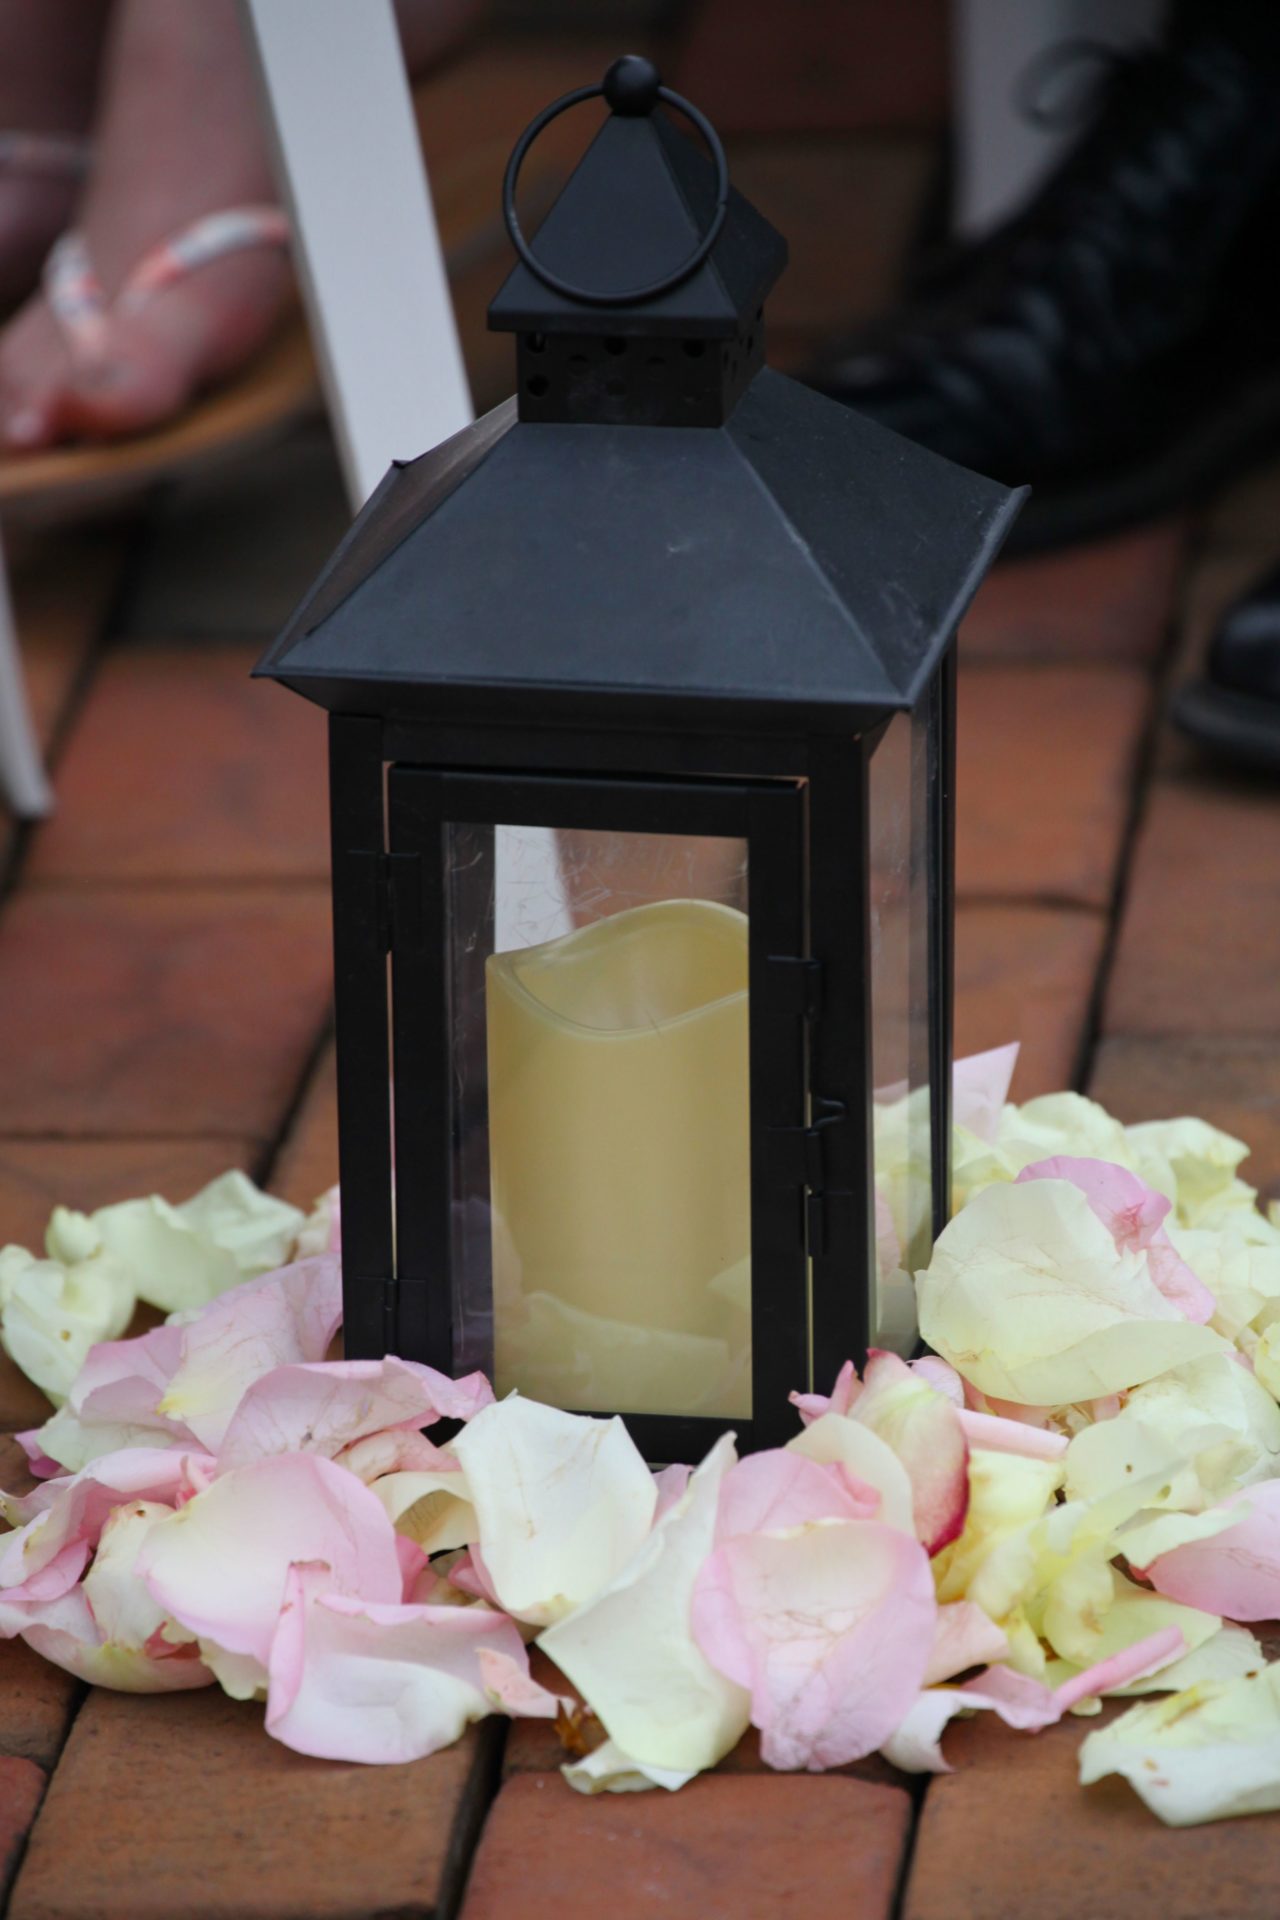 Rose petals around candle to decorate wedding ceremony aisle